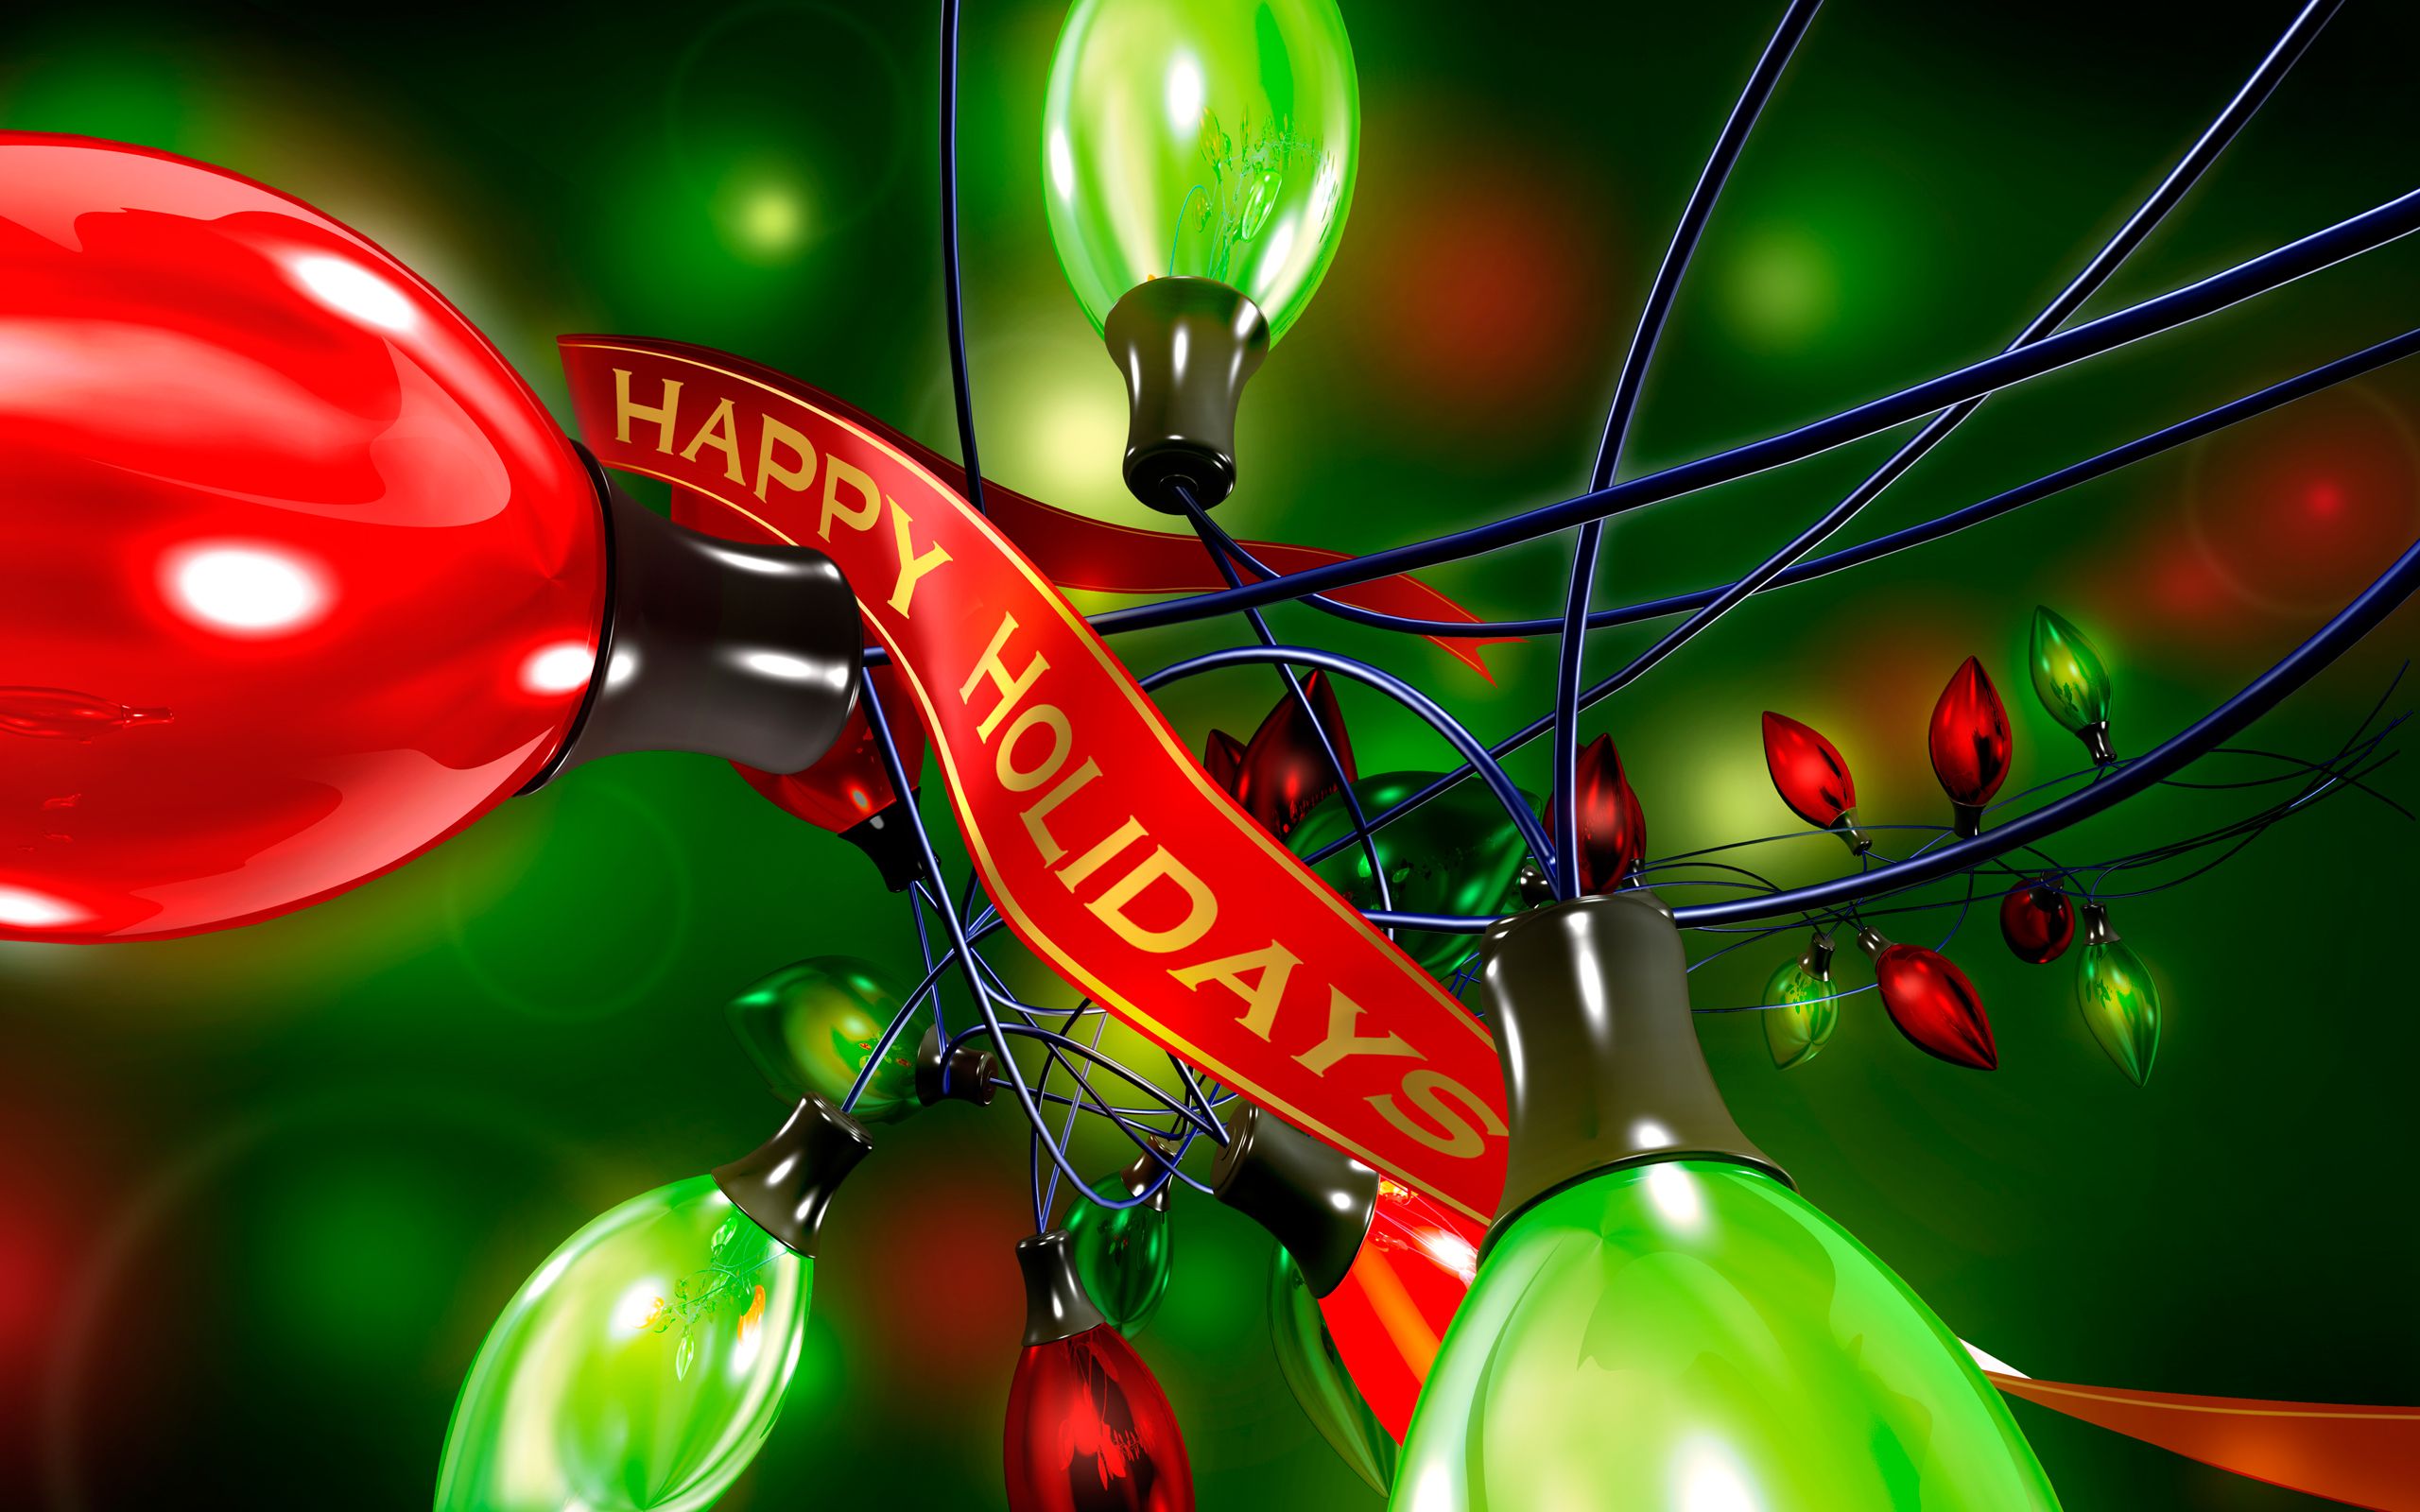 Happy Holiday Wallpapers Hd Wide Hd Wallpapers Download - Wallpaper - HD Wallpaper 